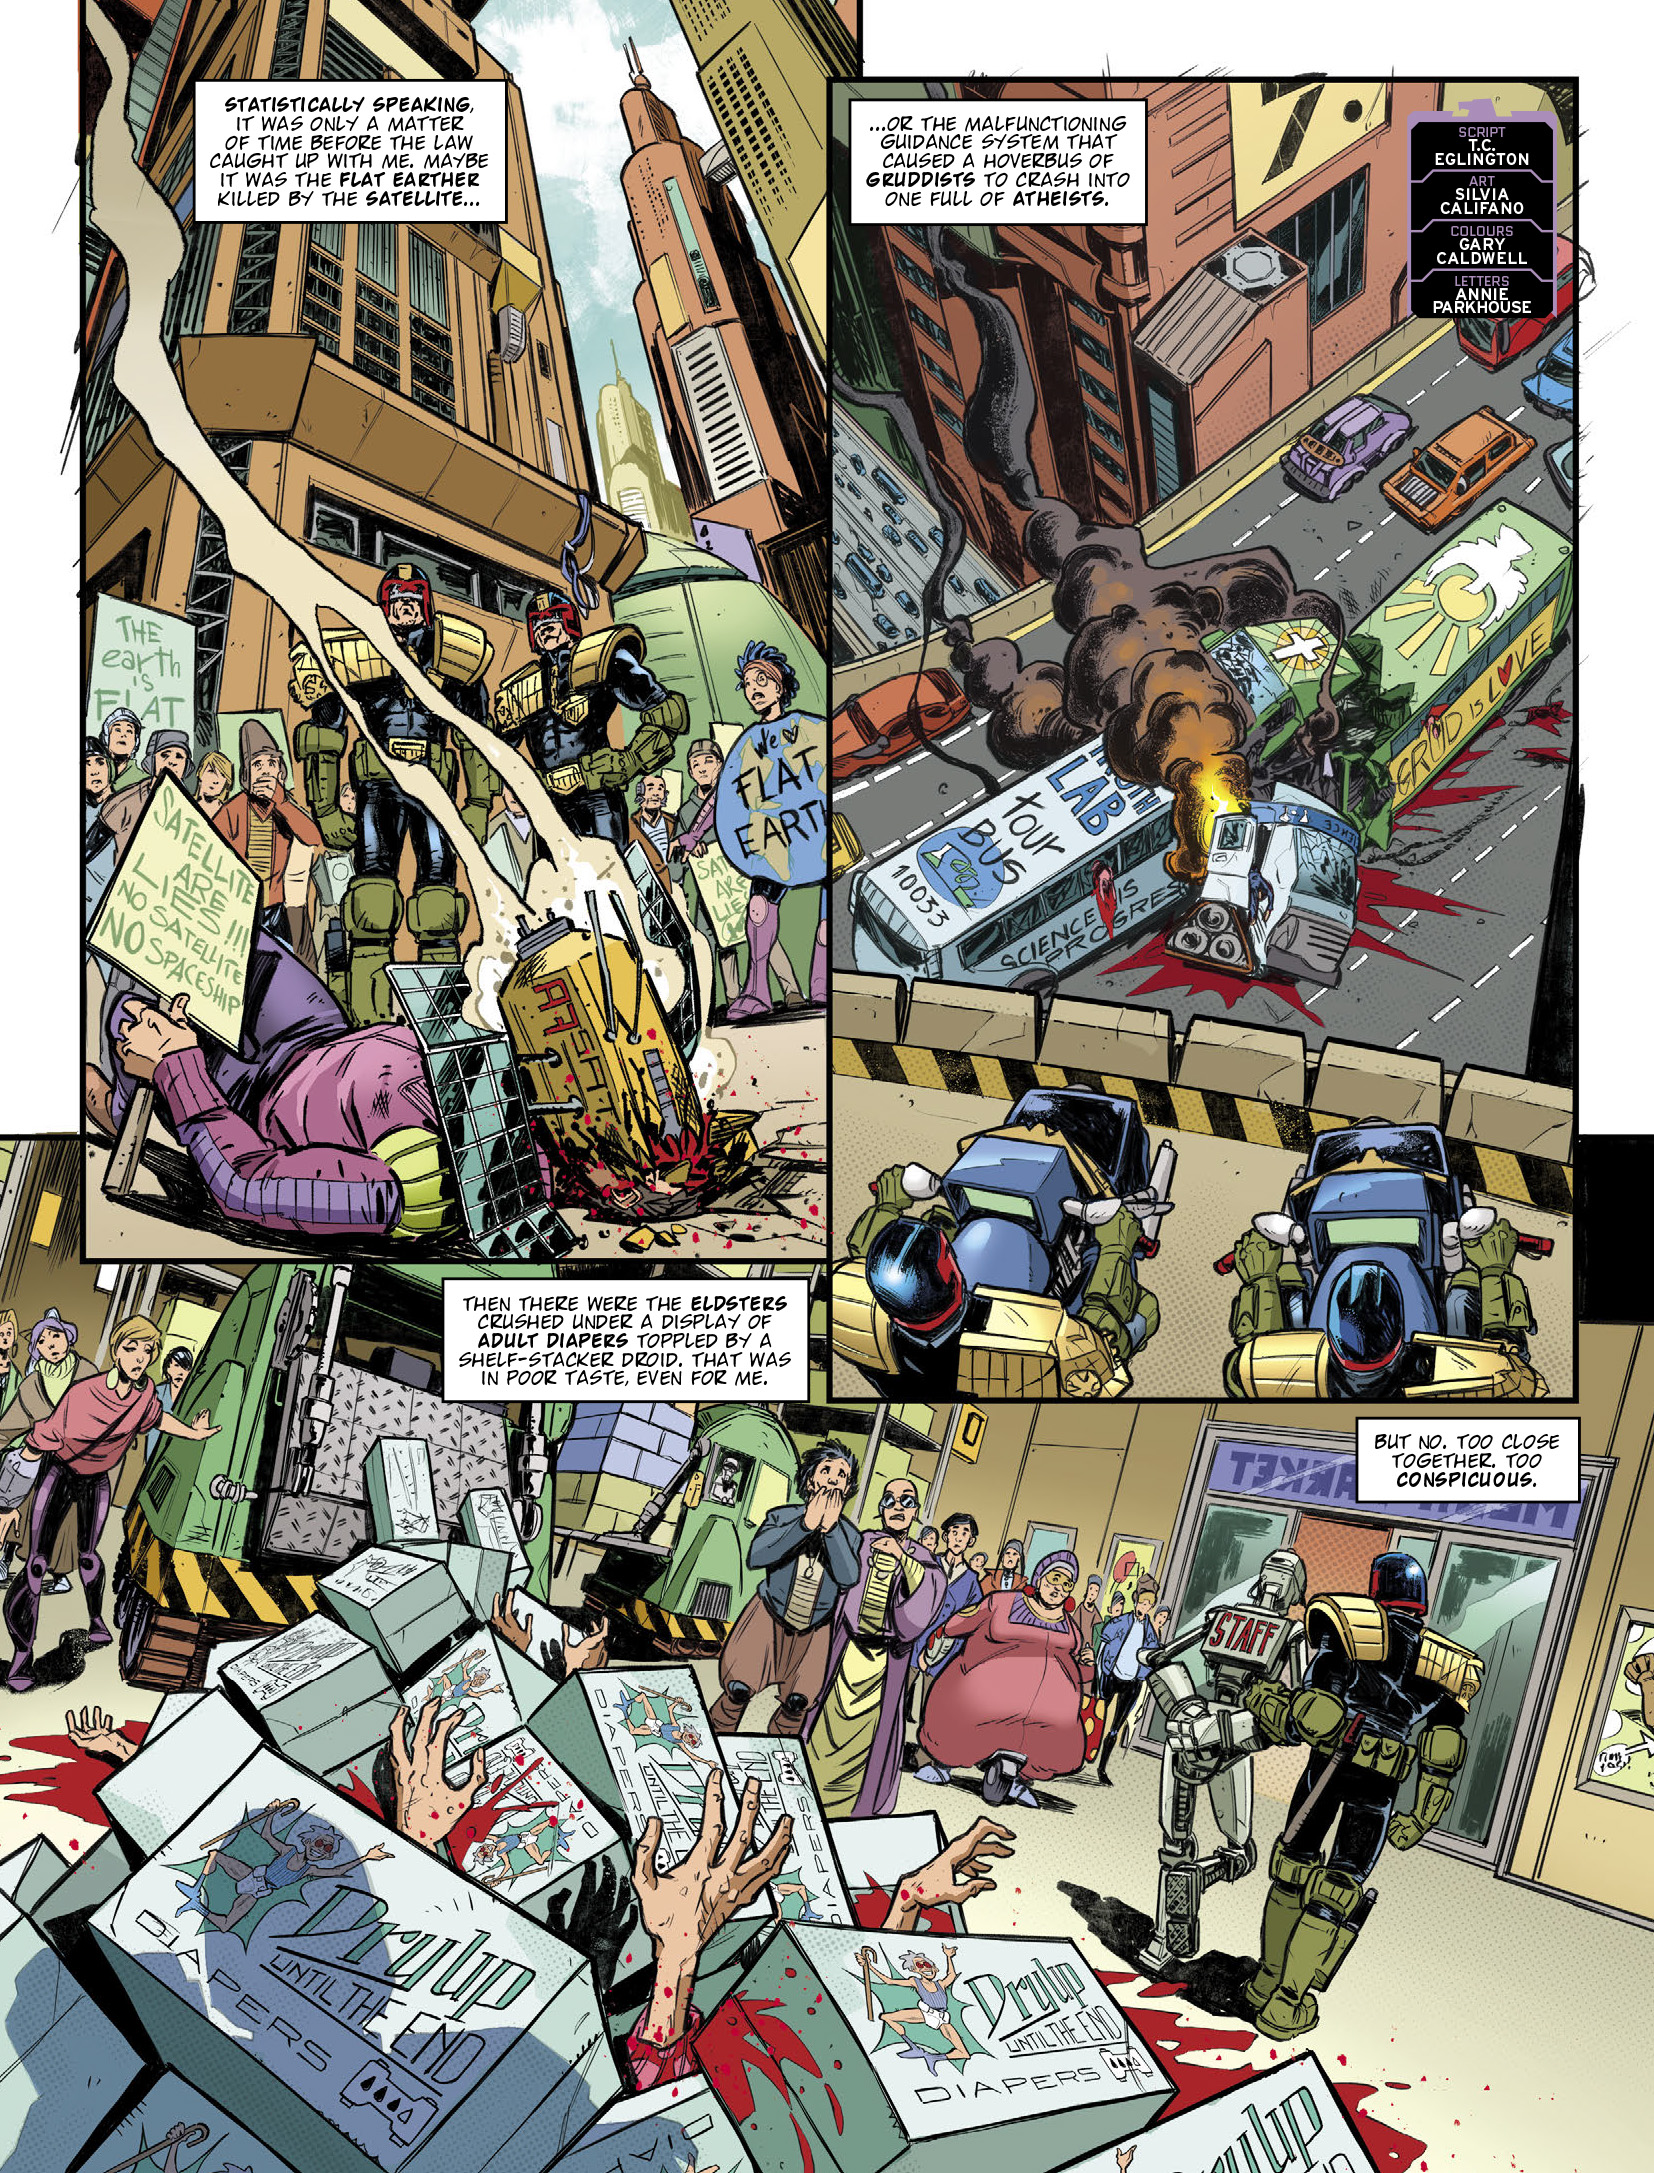 2000 AD: Chapter 2268 - Page 3